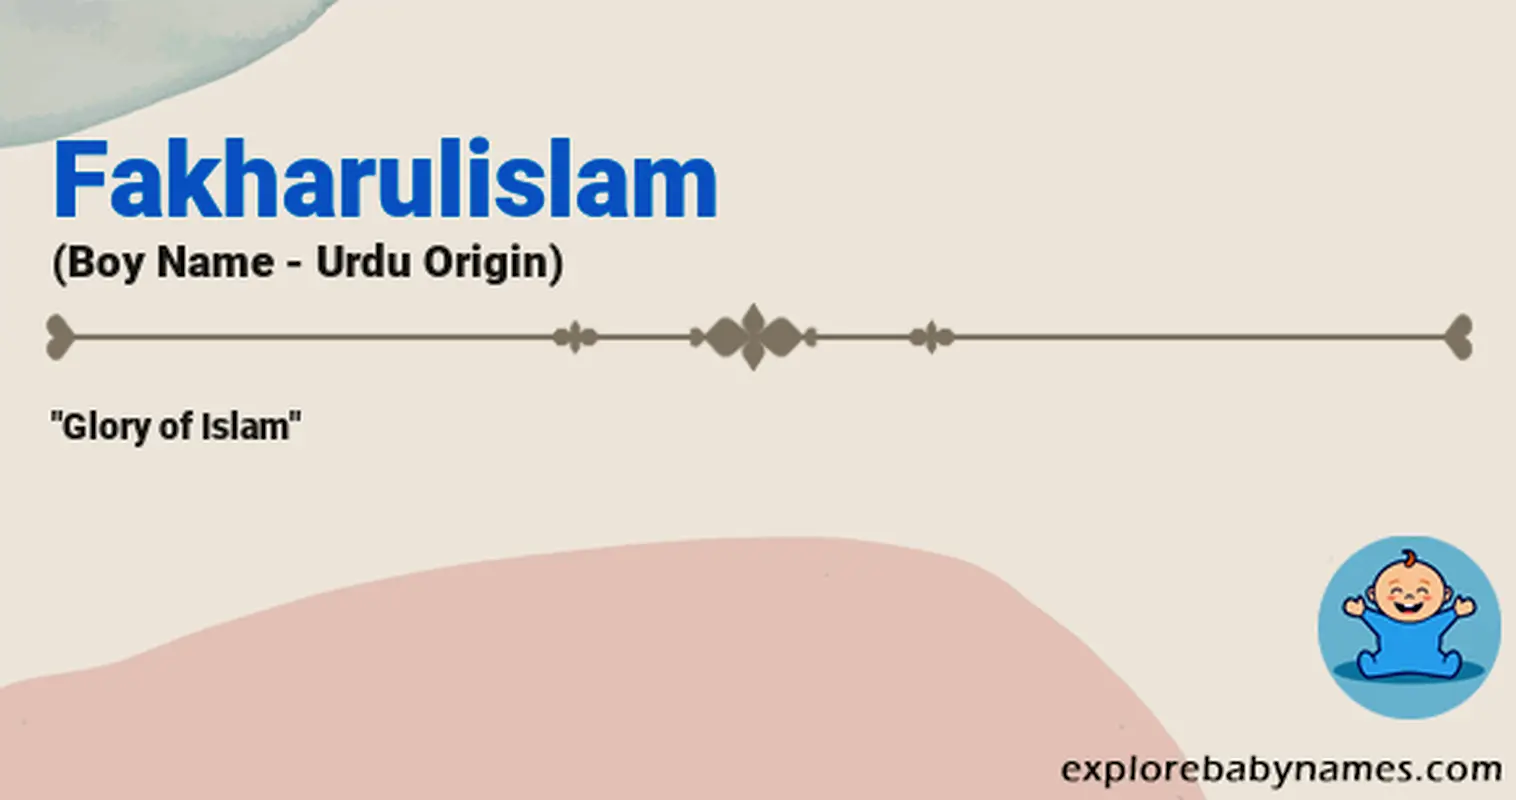 Meaning of Fakharulislam